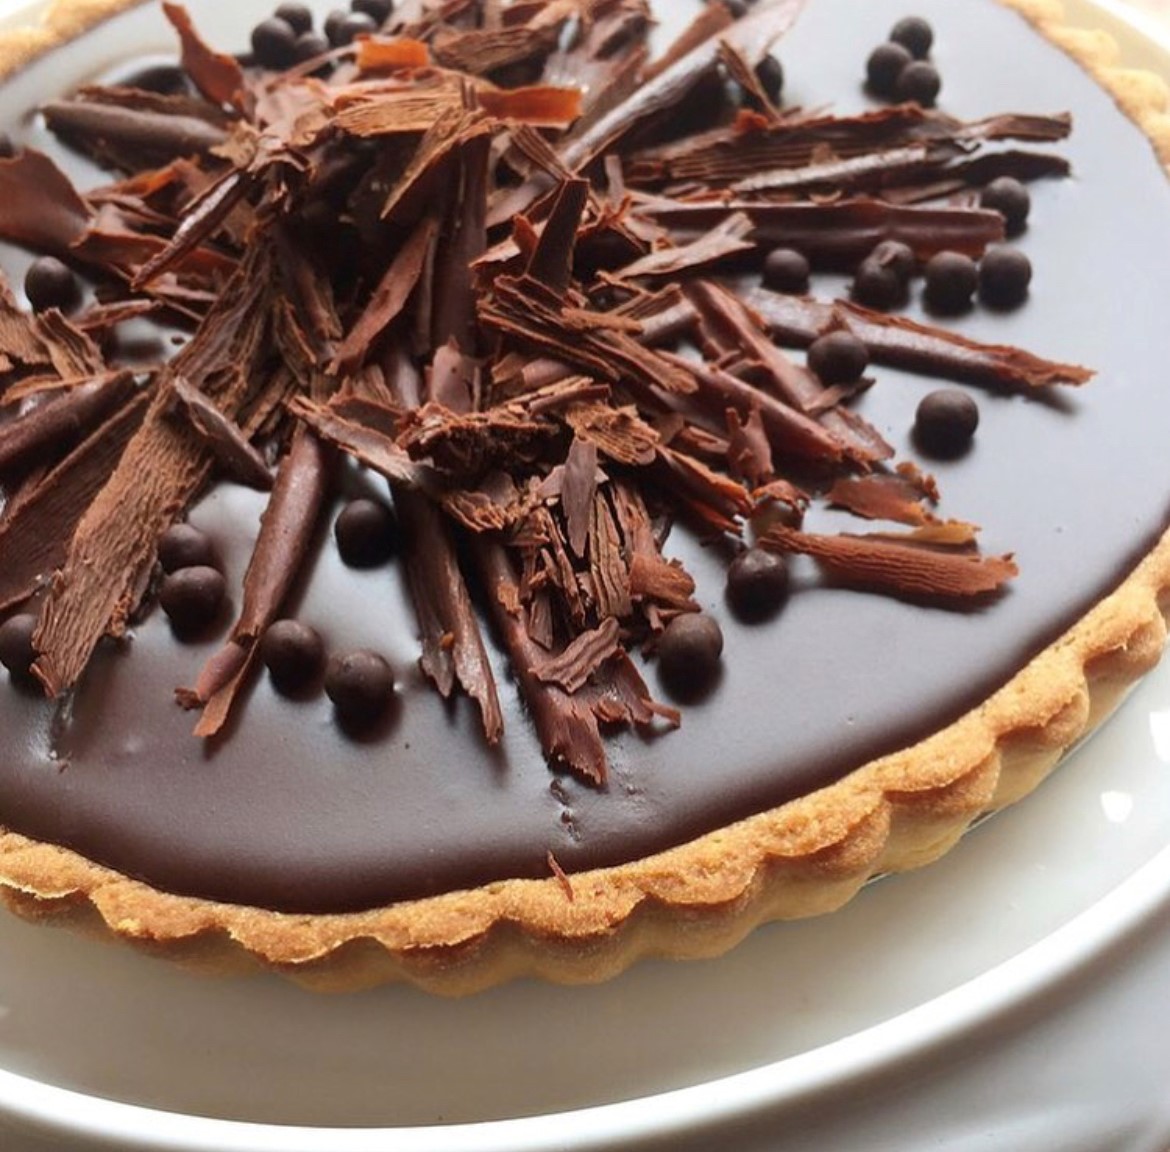 Chocolate tart with brown crust, chocolate ganache and shaved chocolate on top